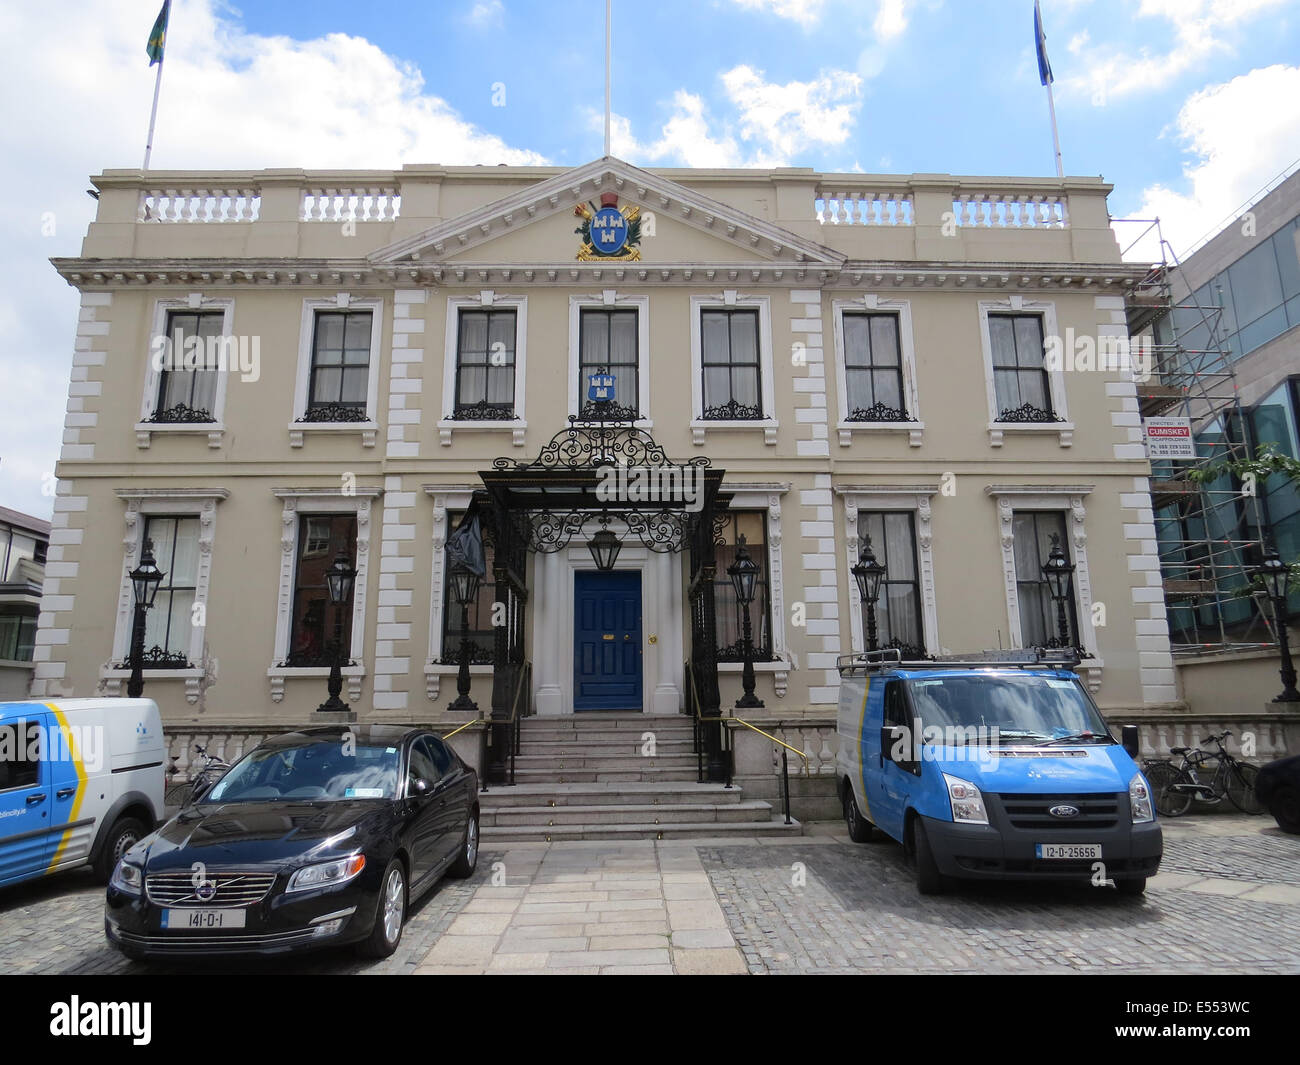 MANSION HOUSE, Dublin, Irland. Haus des Oberbürgermeisters. Foto Tony Gale Stockfoto